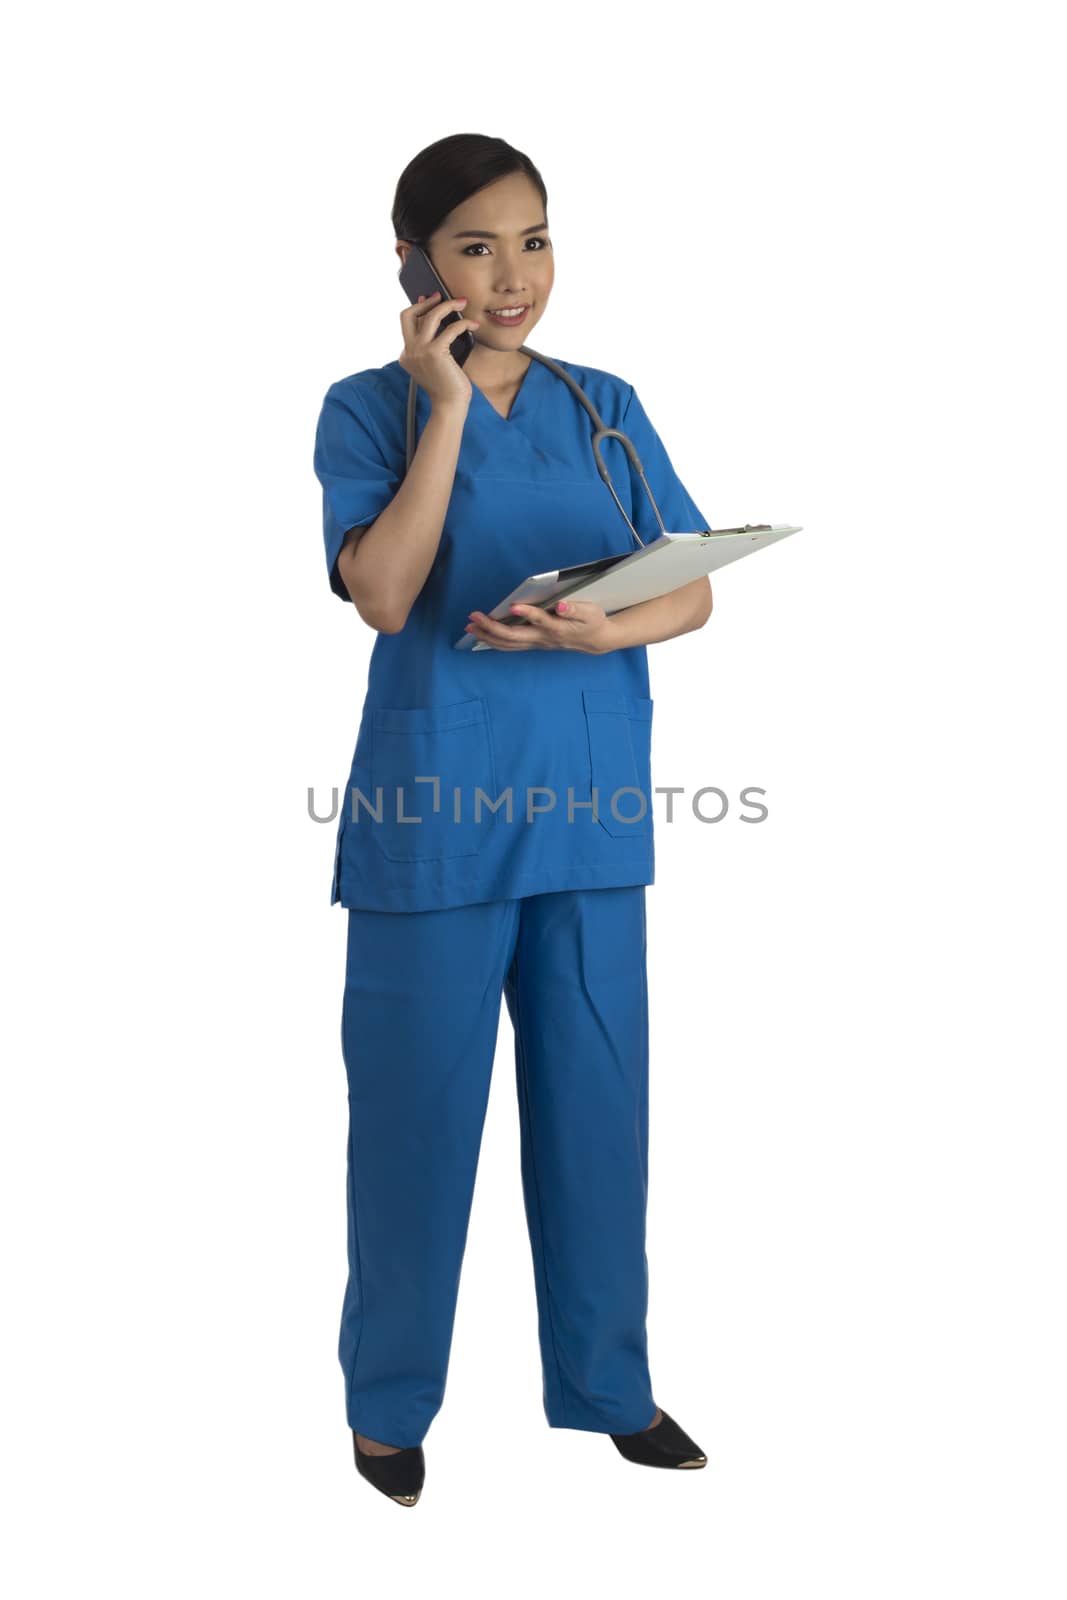 Busy female doctor in blue uniform standing while her hands holding tablet, clipboard and mobile phone on white background.